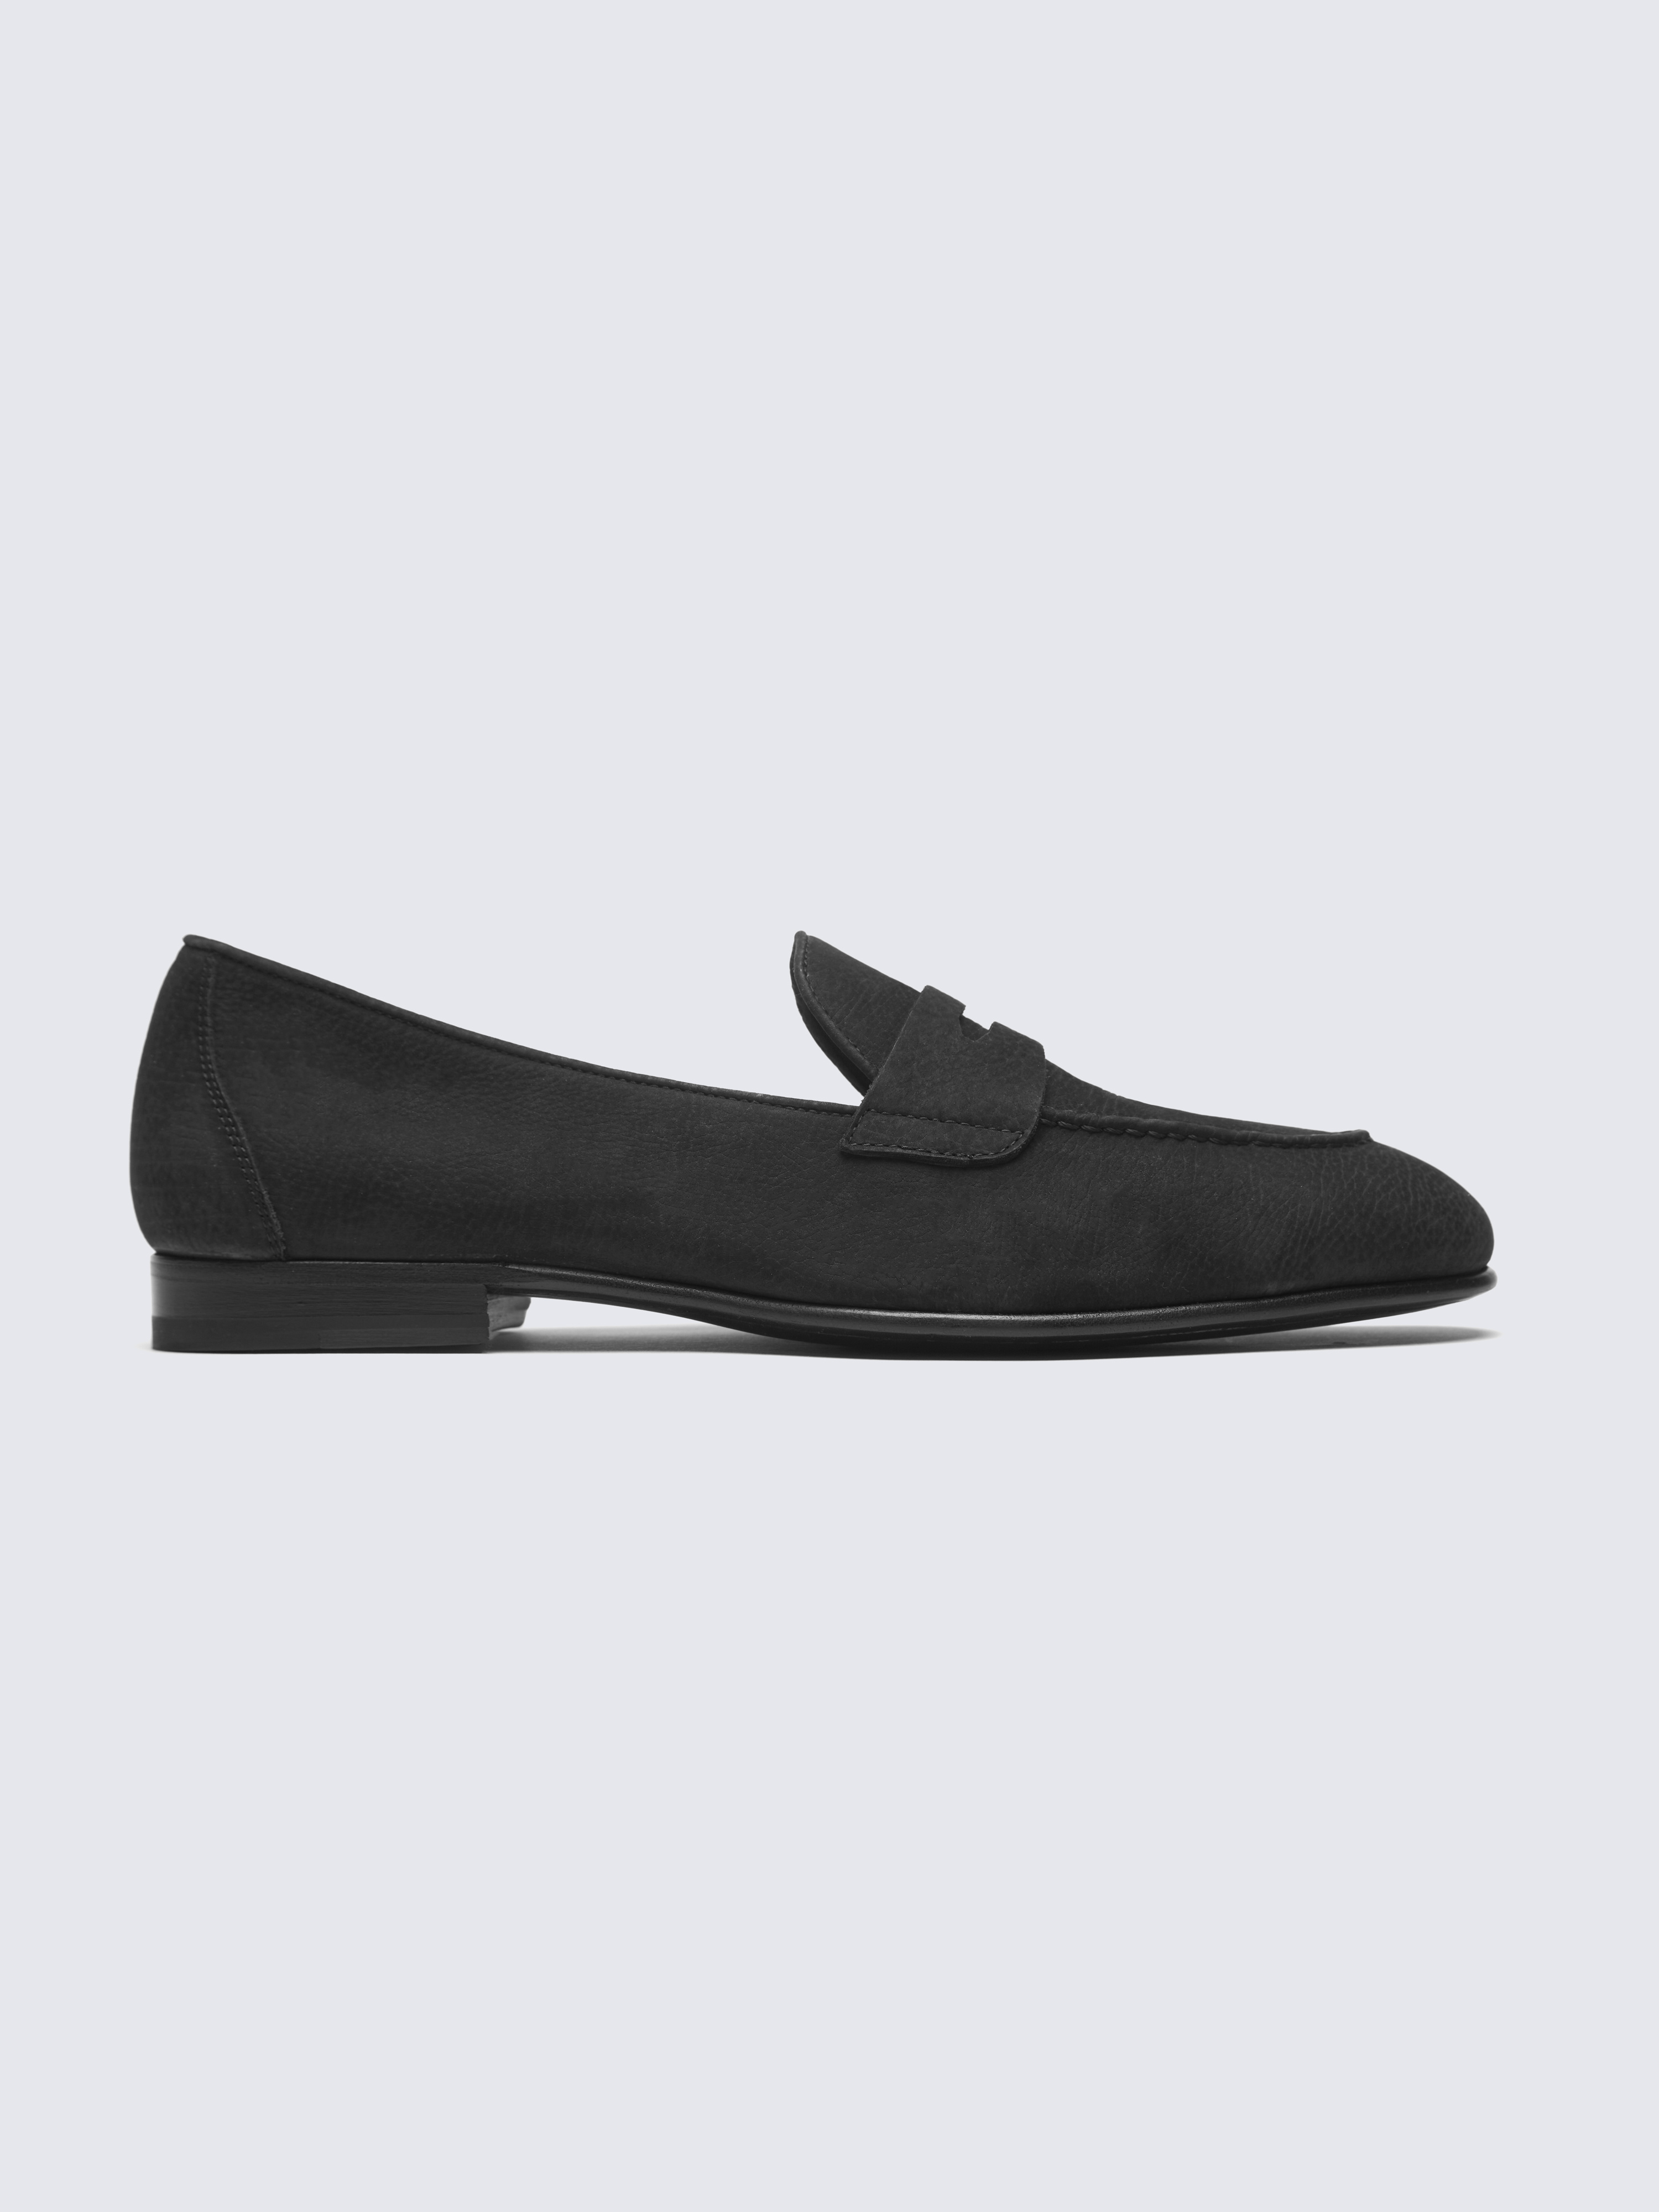 Black nubuck Appia penny loafer | Brioni® US Official Store